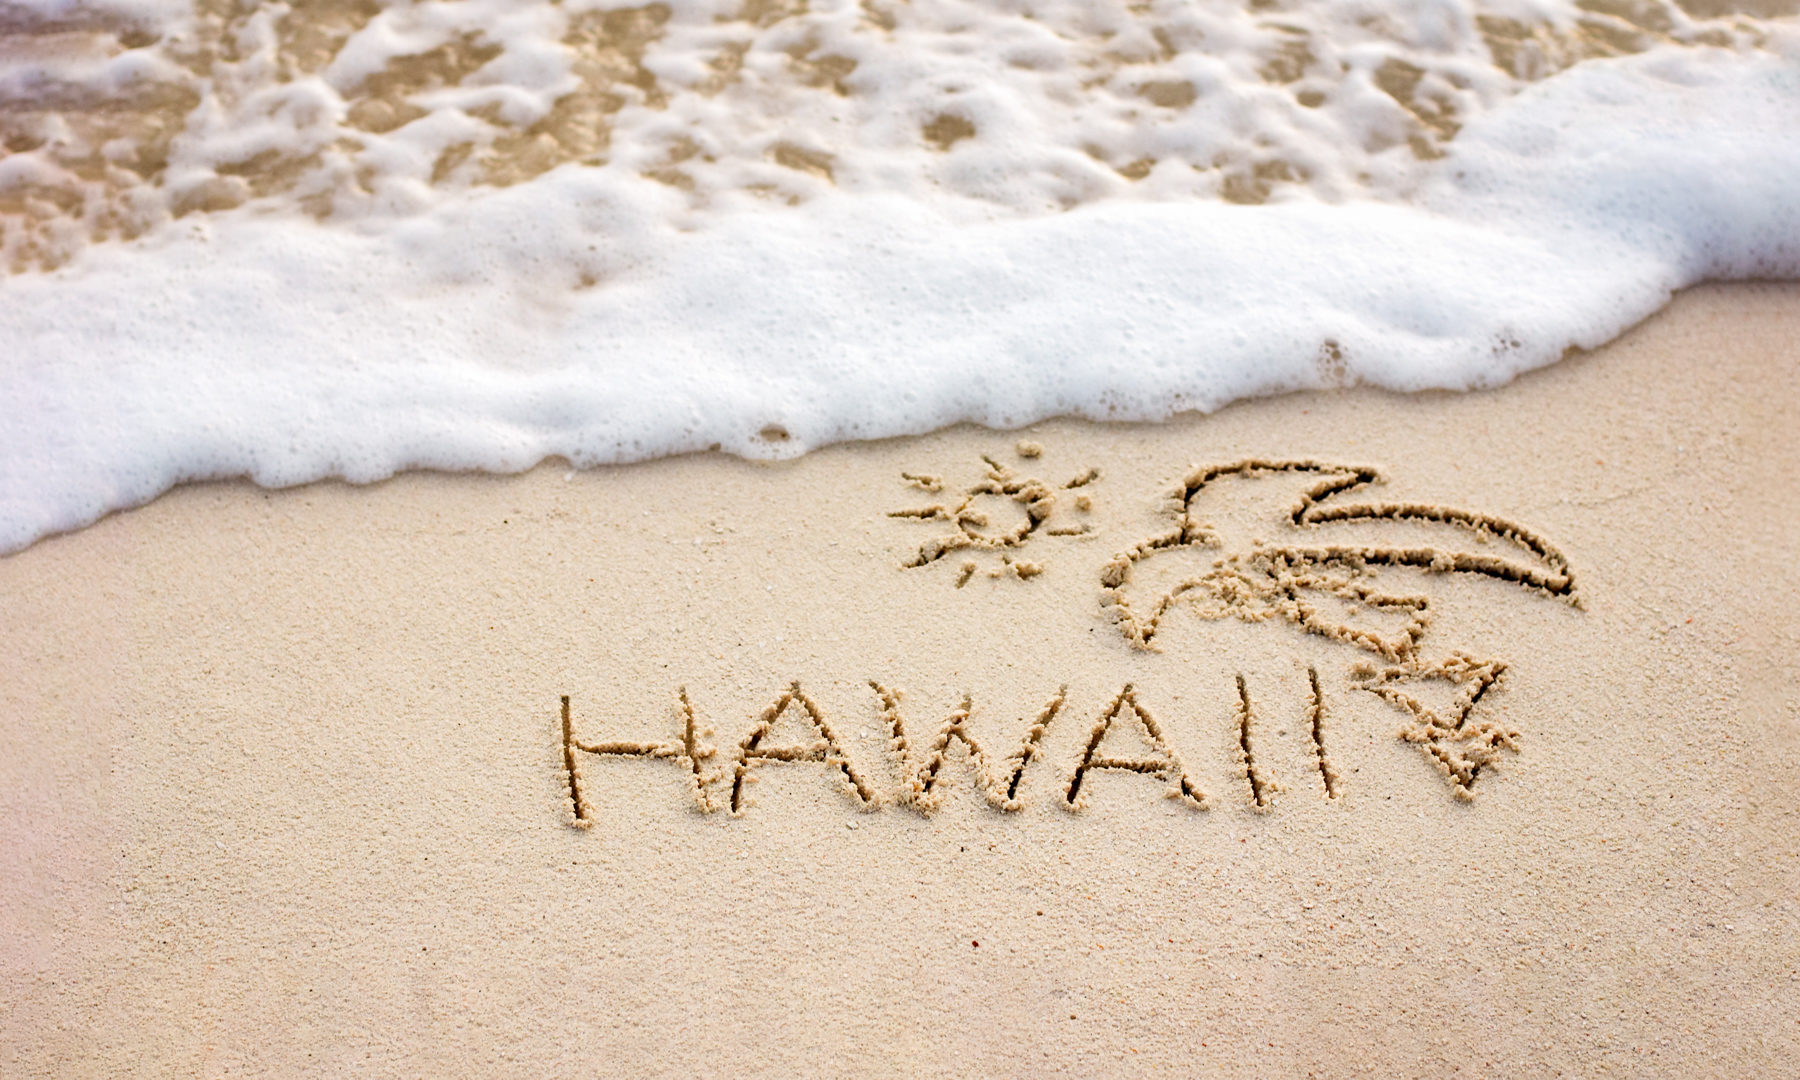 Hawaii Packing List: What to Pack for Hawaii